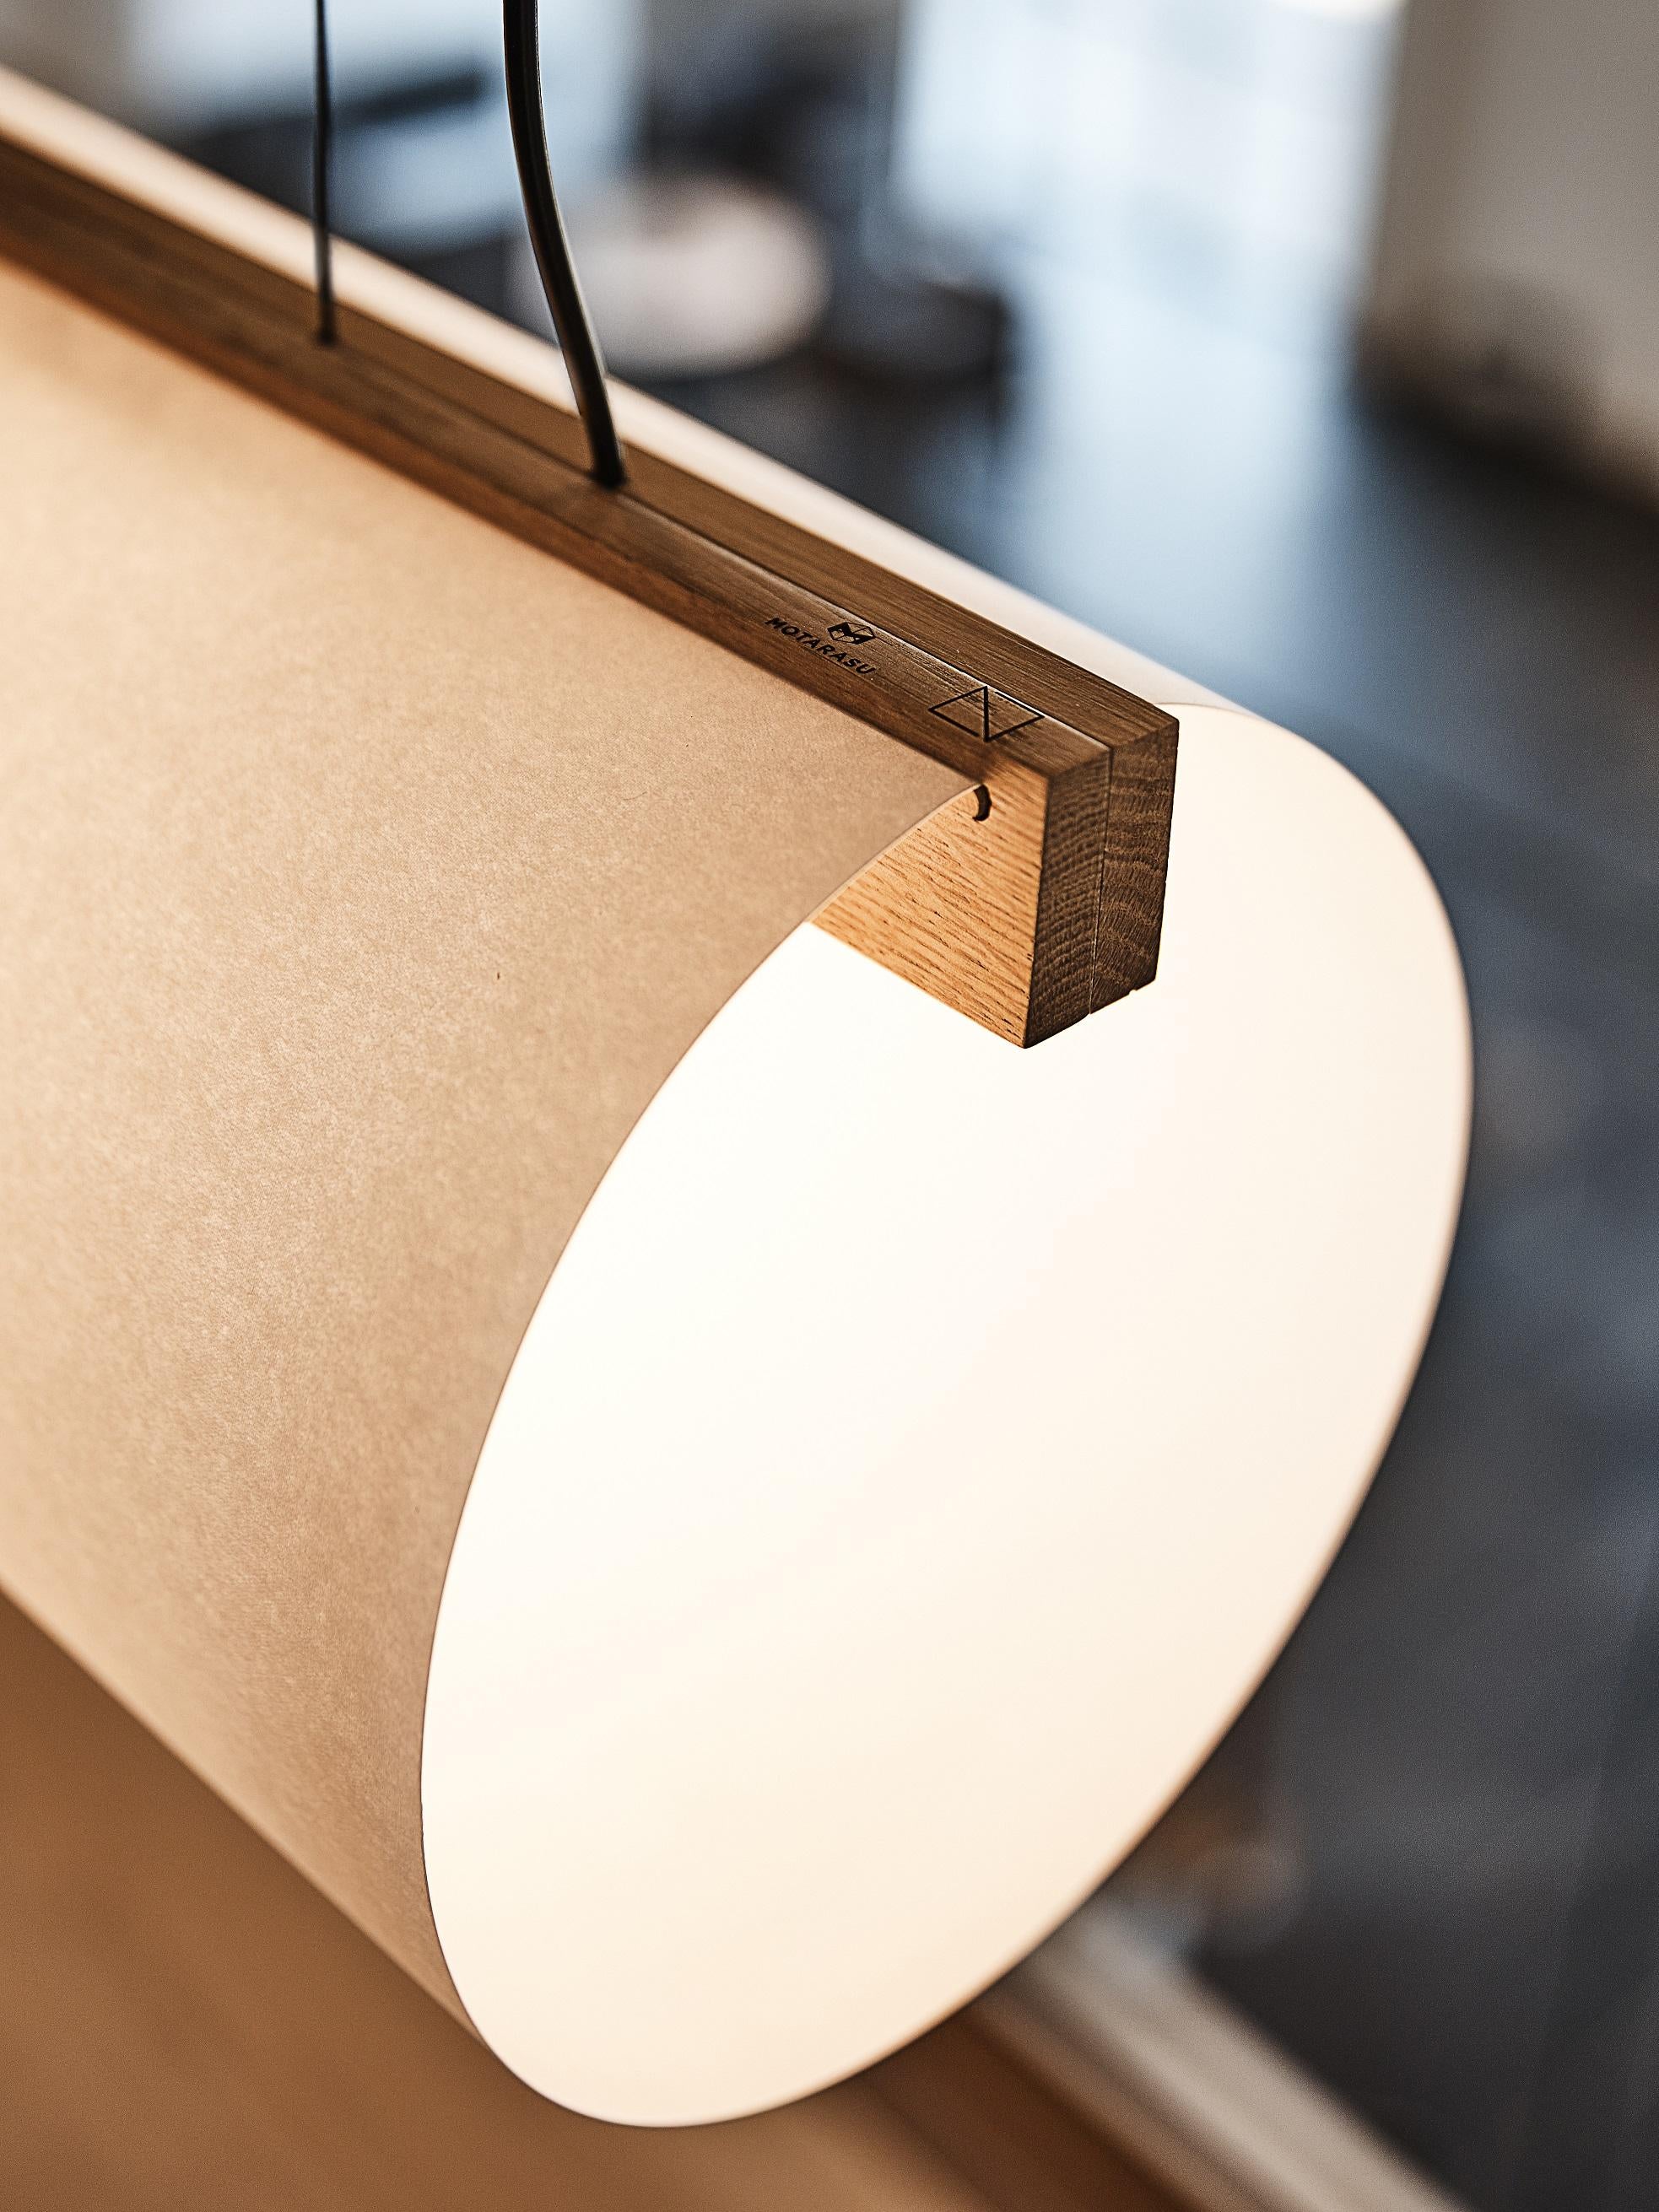 ENSO pendant by Lars Vejen for MOTARASU
ENSO pendant is based on traditional Japanese wood joinery using the best materials and handcraft and developed for LED light.

The lamp shades is constructed with special coated Japanese washi paper making it